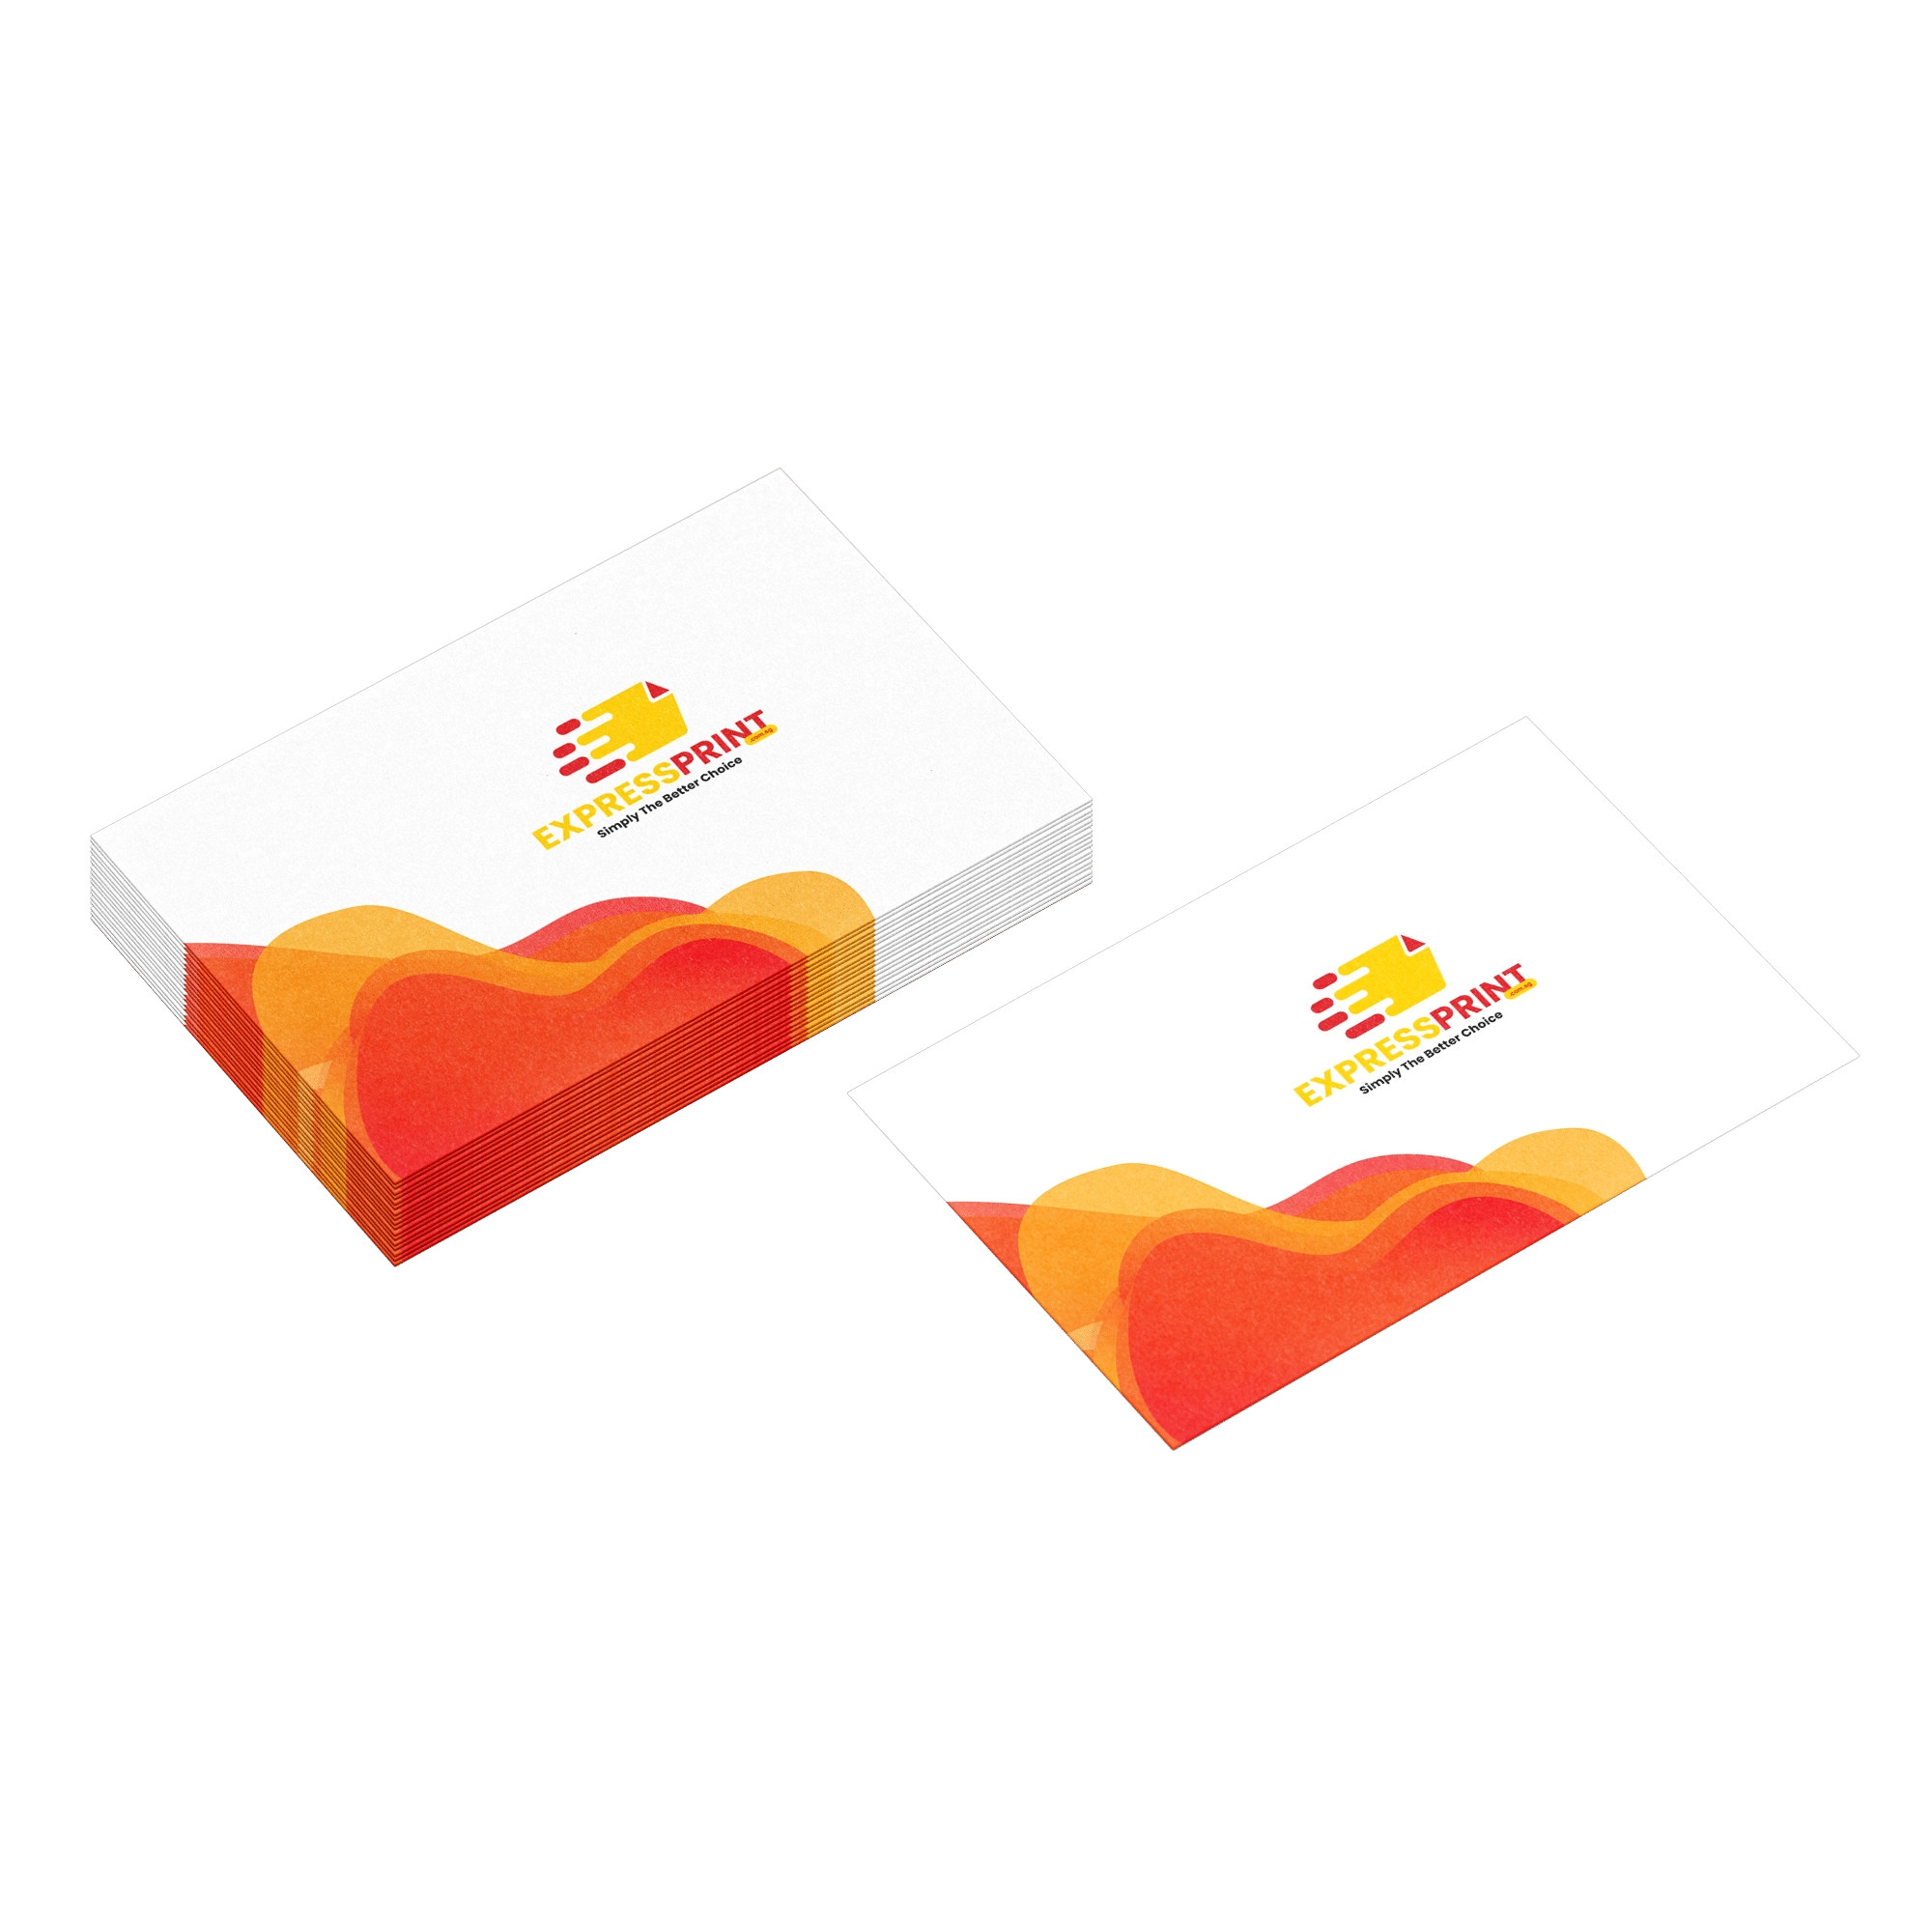 Customized Printing of Business Card Standard